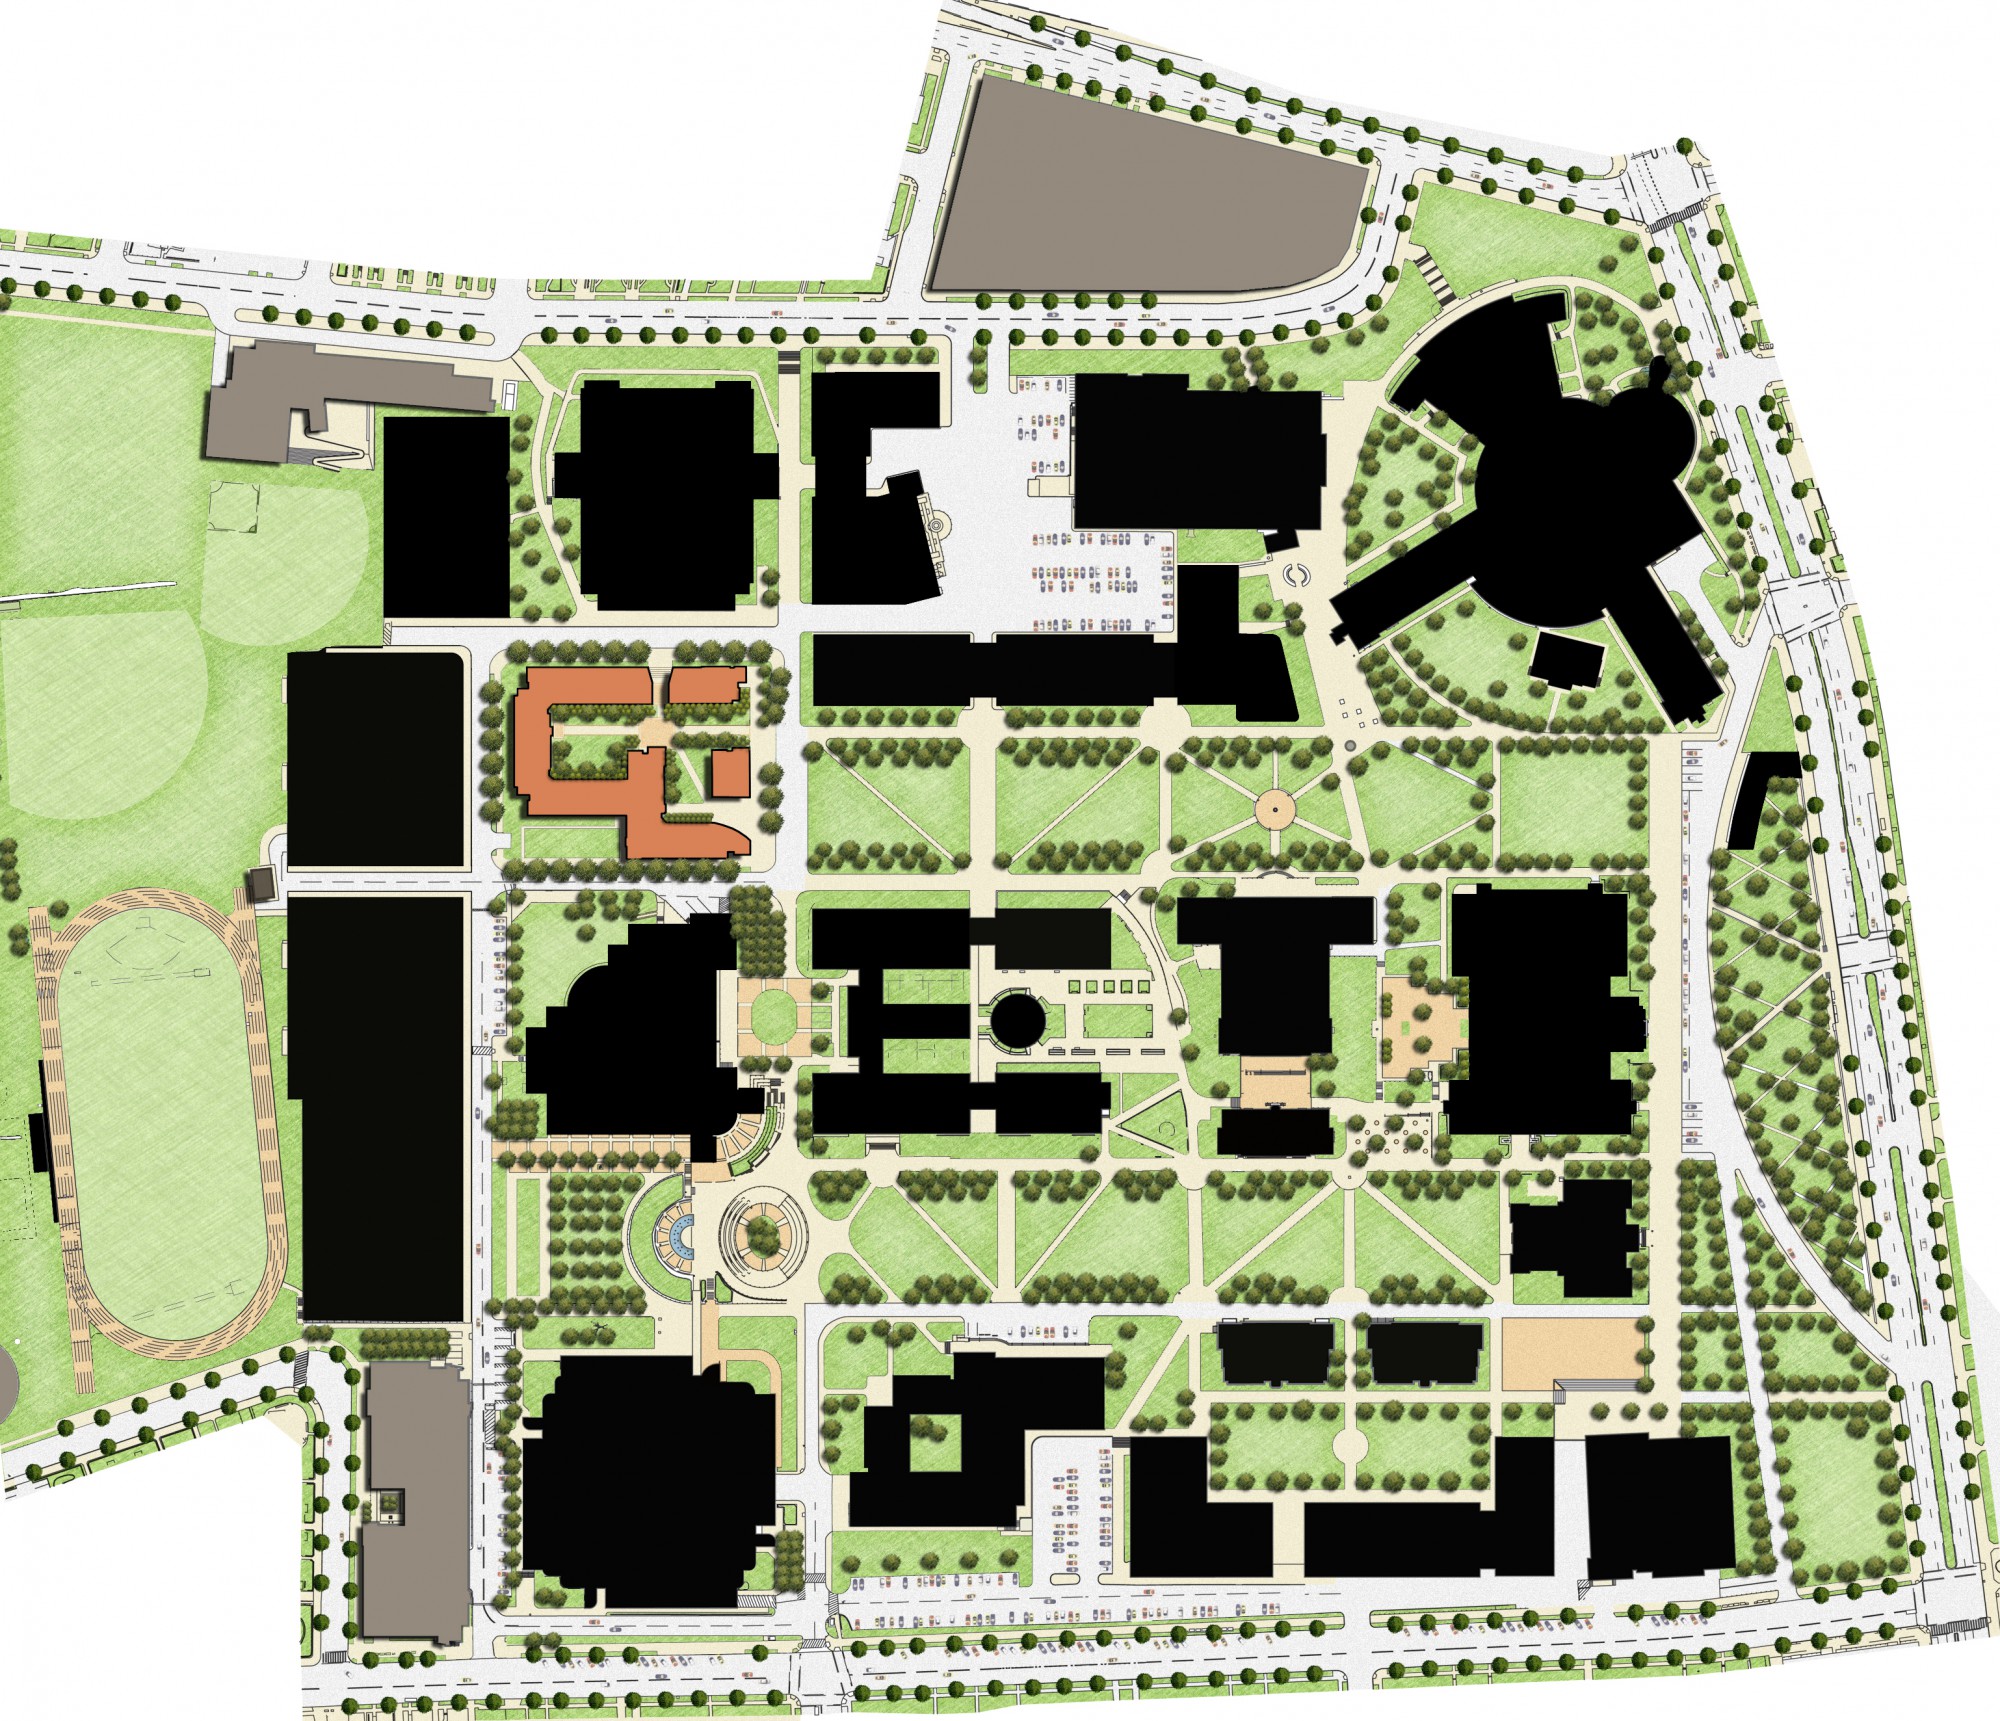 City University of New York, Queens Campus - The Summit · Design Collective